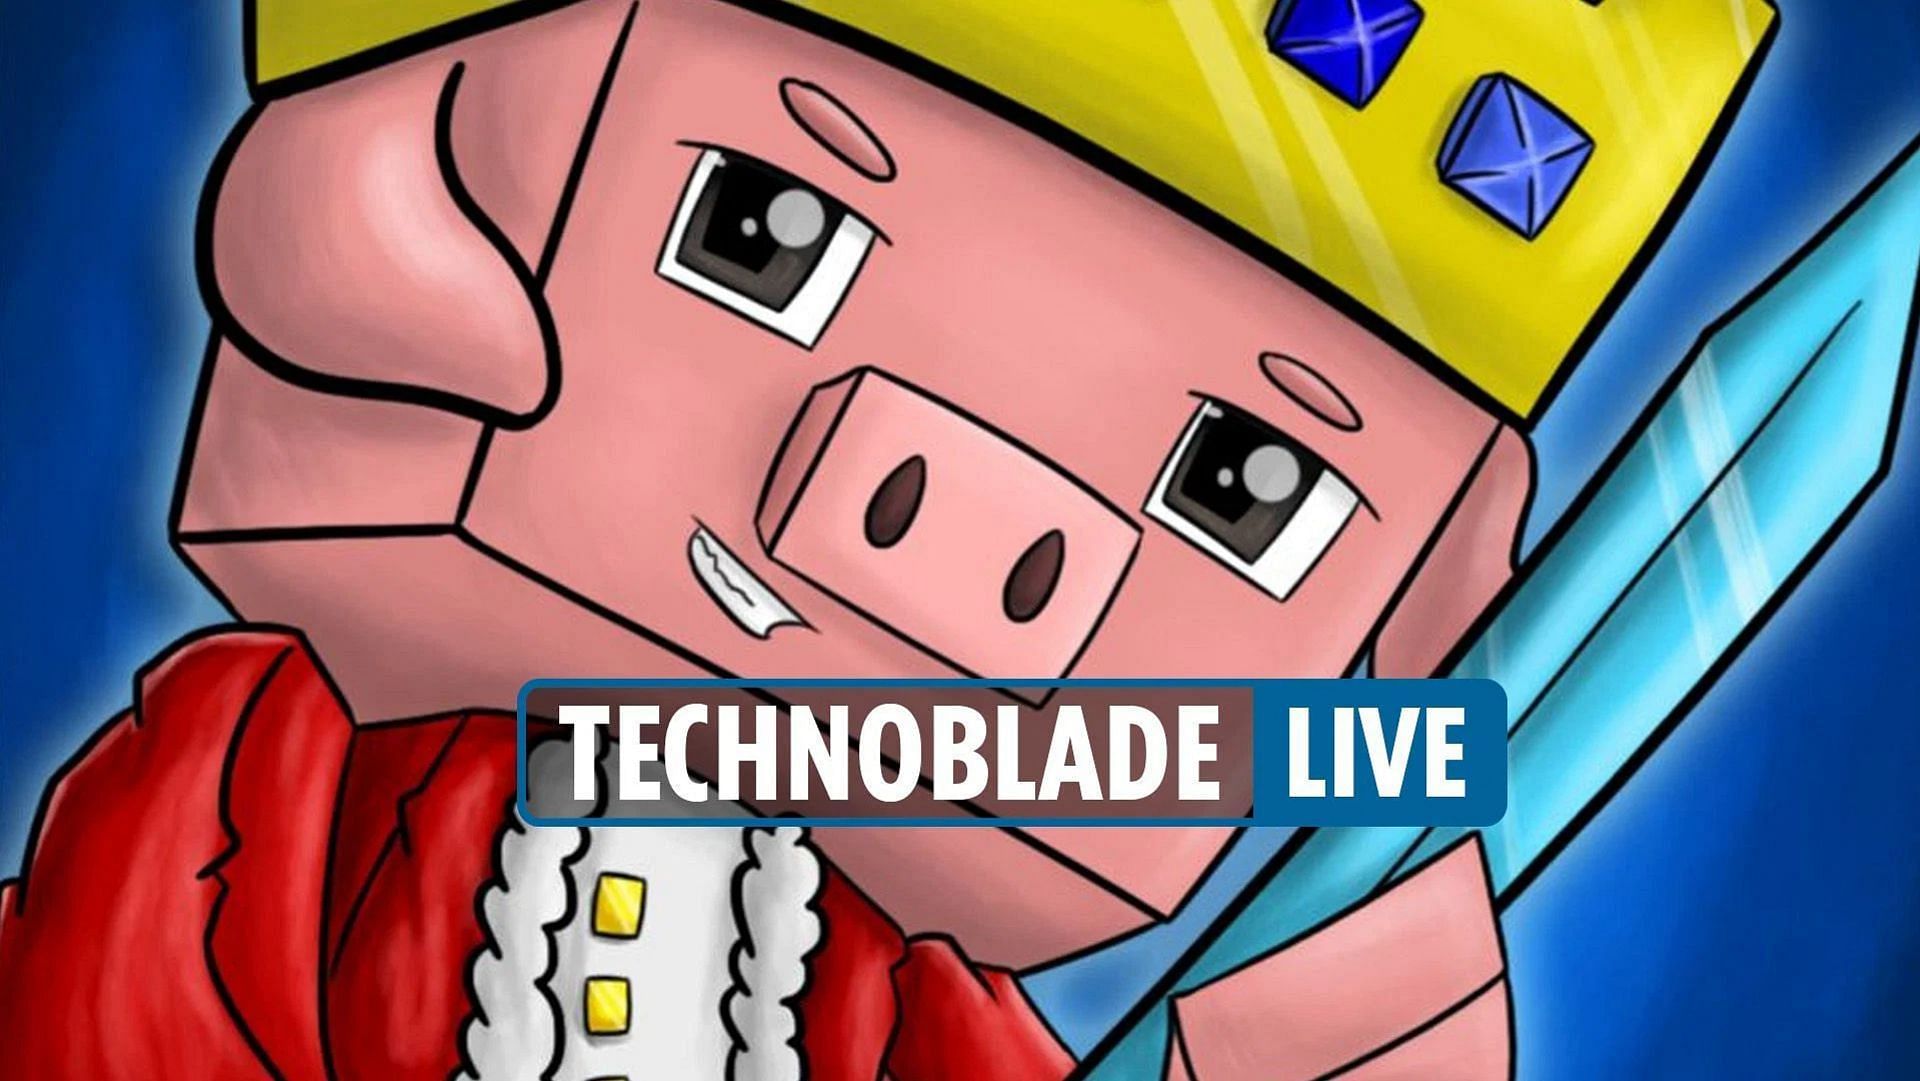 What is the real name of Technoblade? All you need to know about